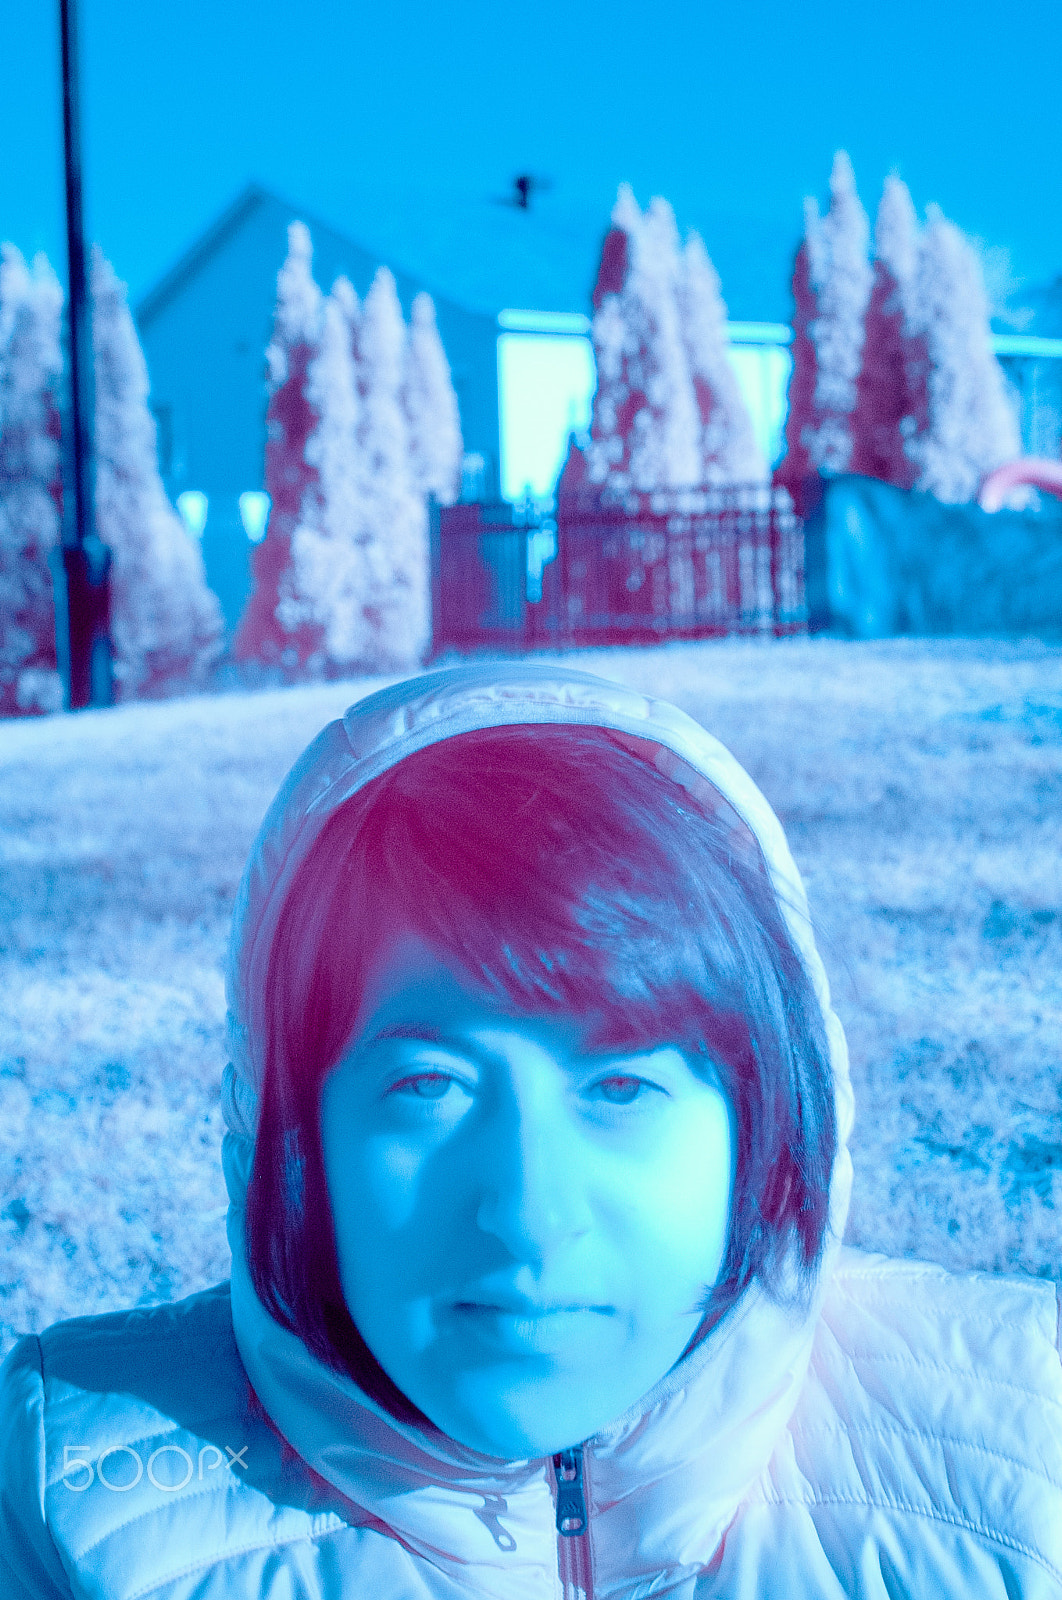 Nikon D700 + Tamron SP AF 17-50mm F2.8 XR Di II VC LD Aspherical (IF) sample photo. First infrared portrait photography